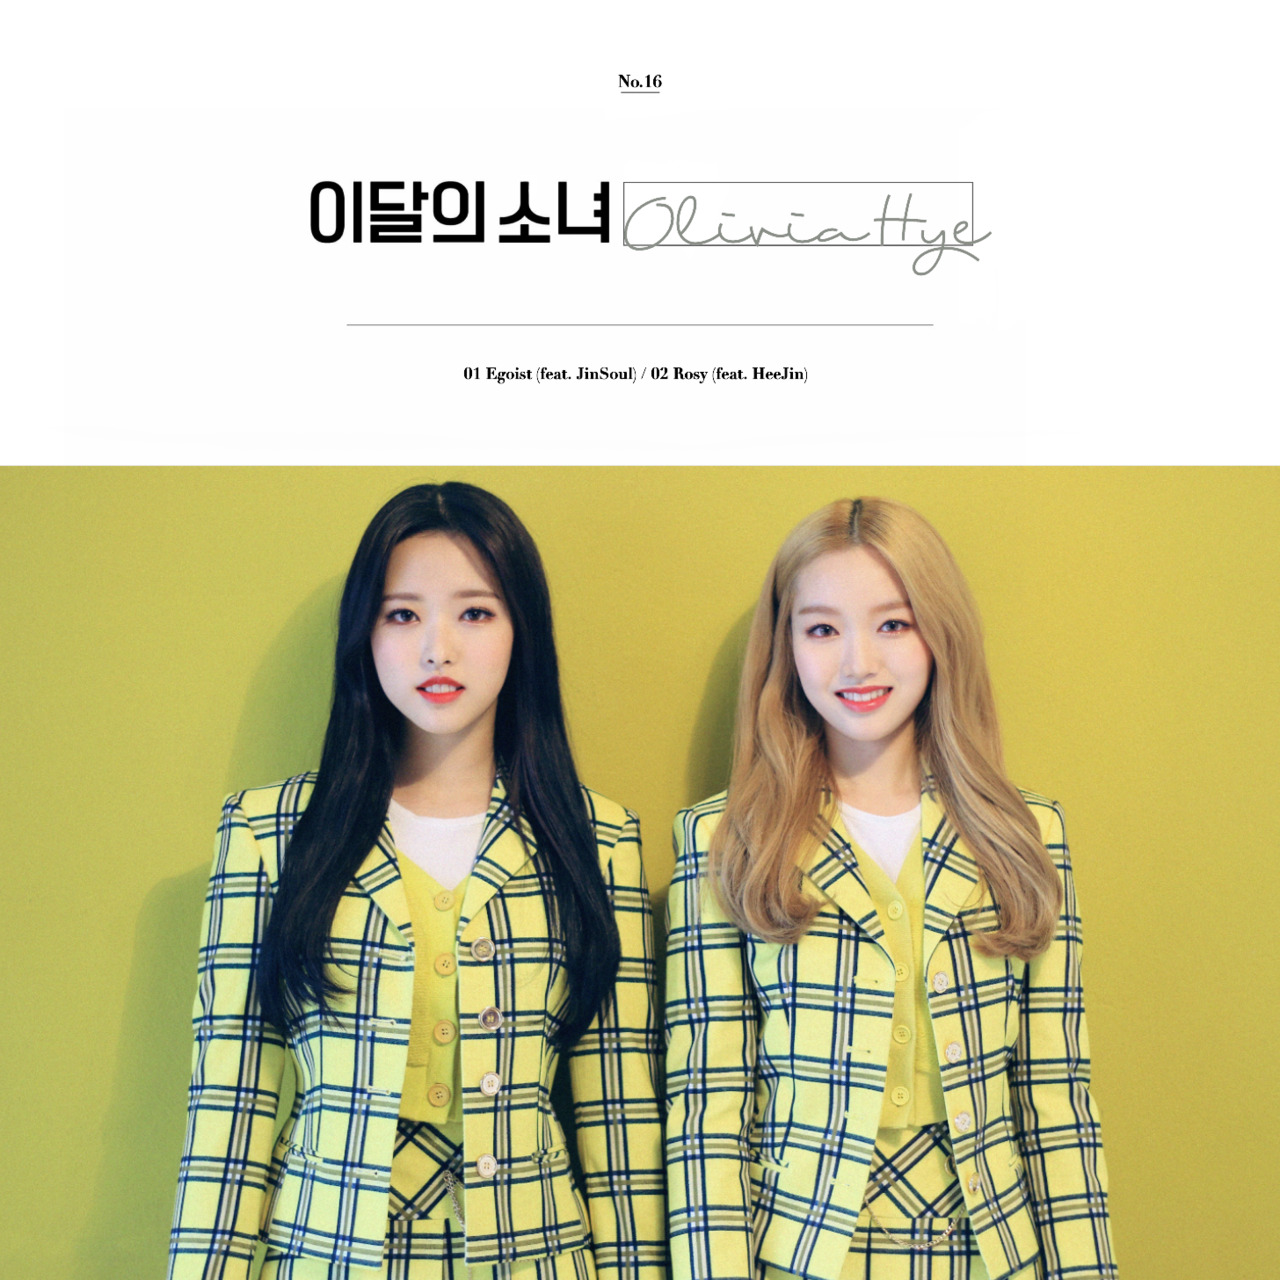 LOONA, Go Won, & Olivia Hye ft. featuring HeeJin Rosy cover artwork